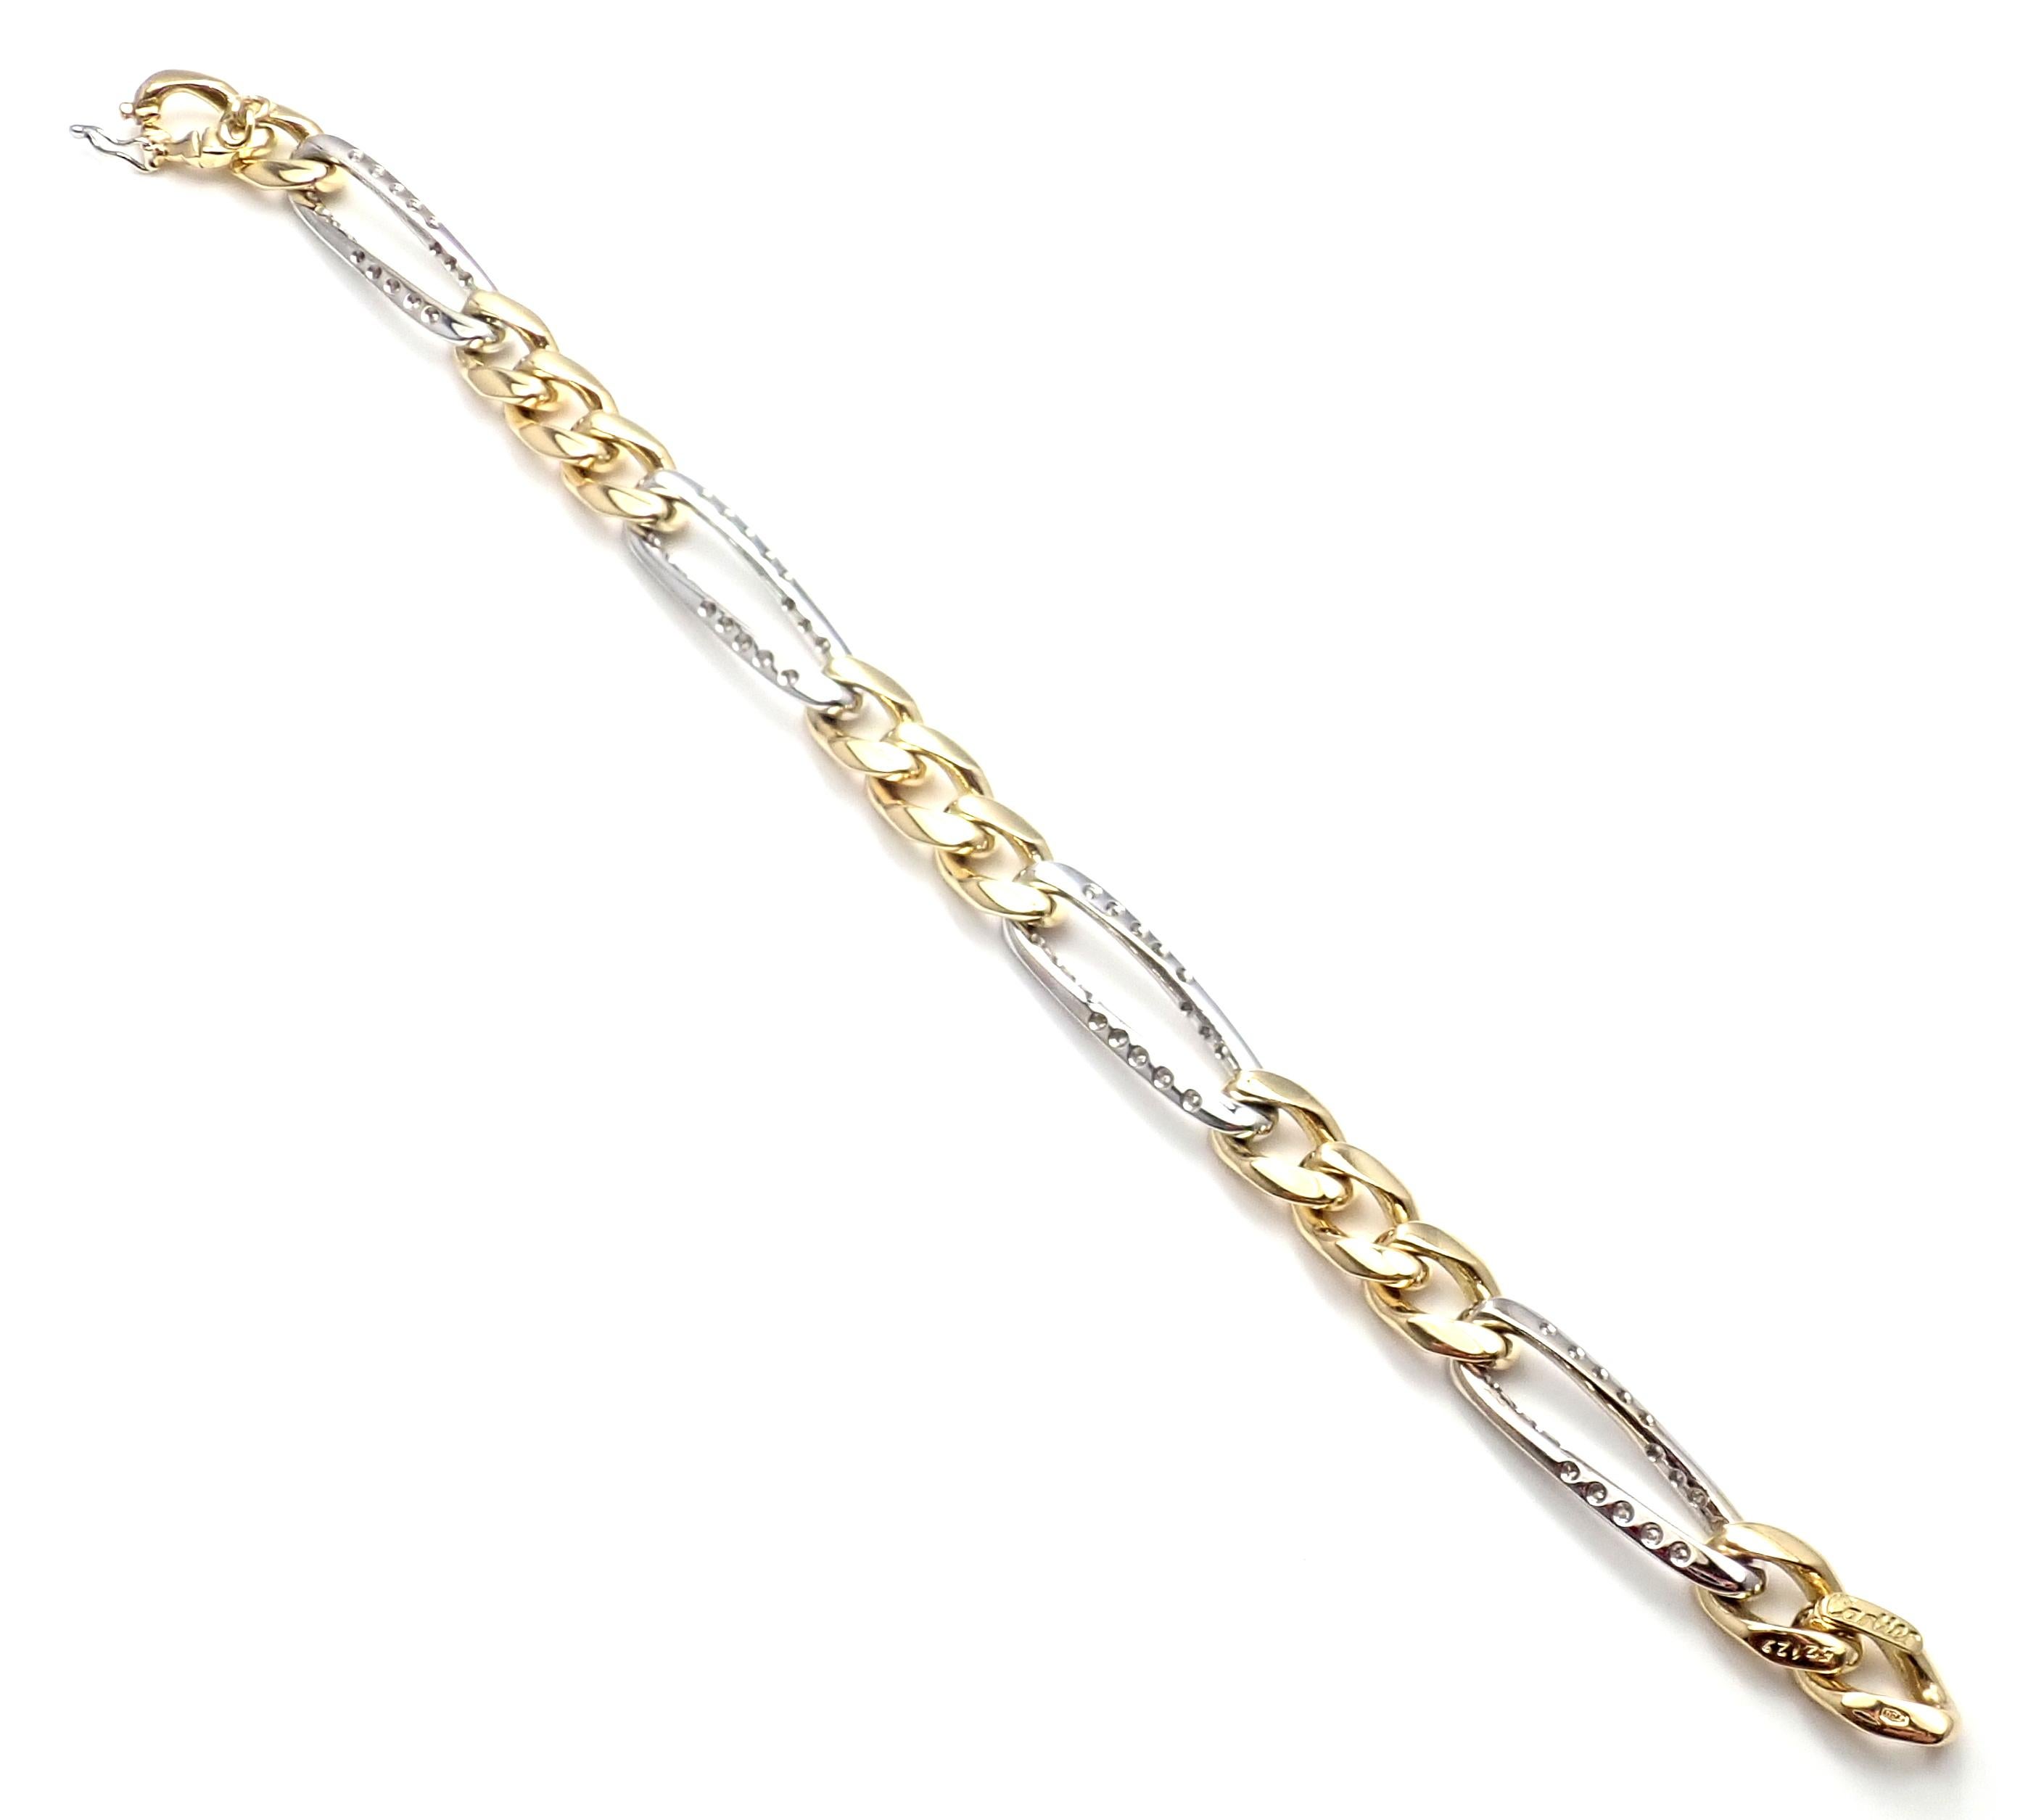 Cartier Diamond Link Yellow and White Gold Bracelet 1